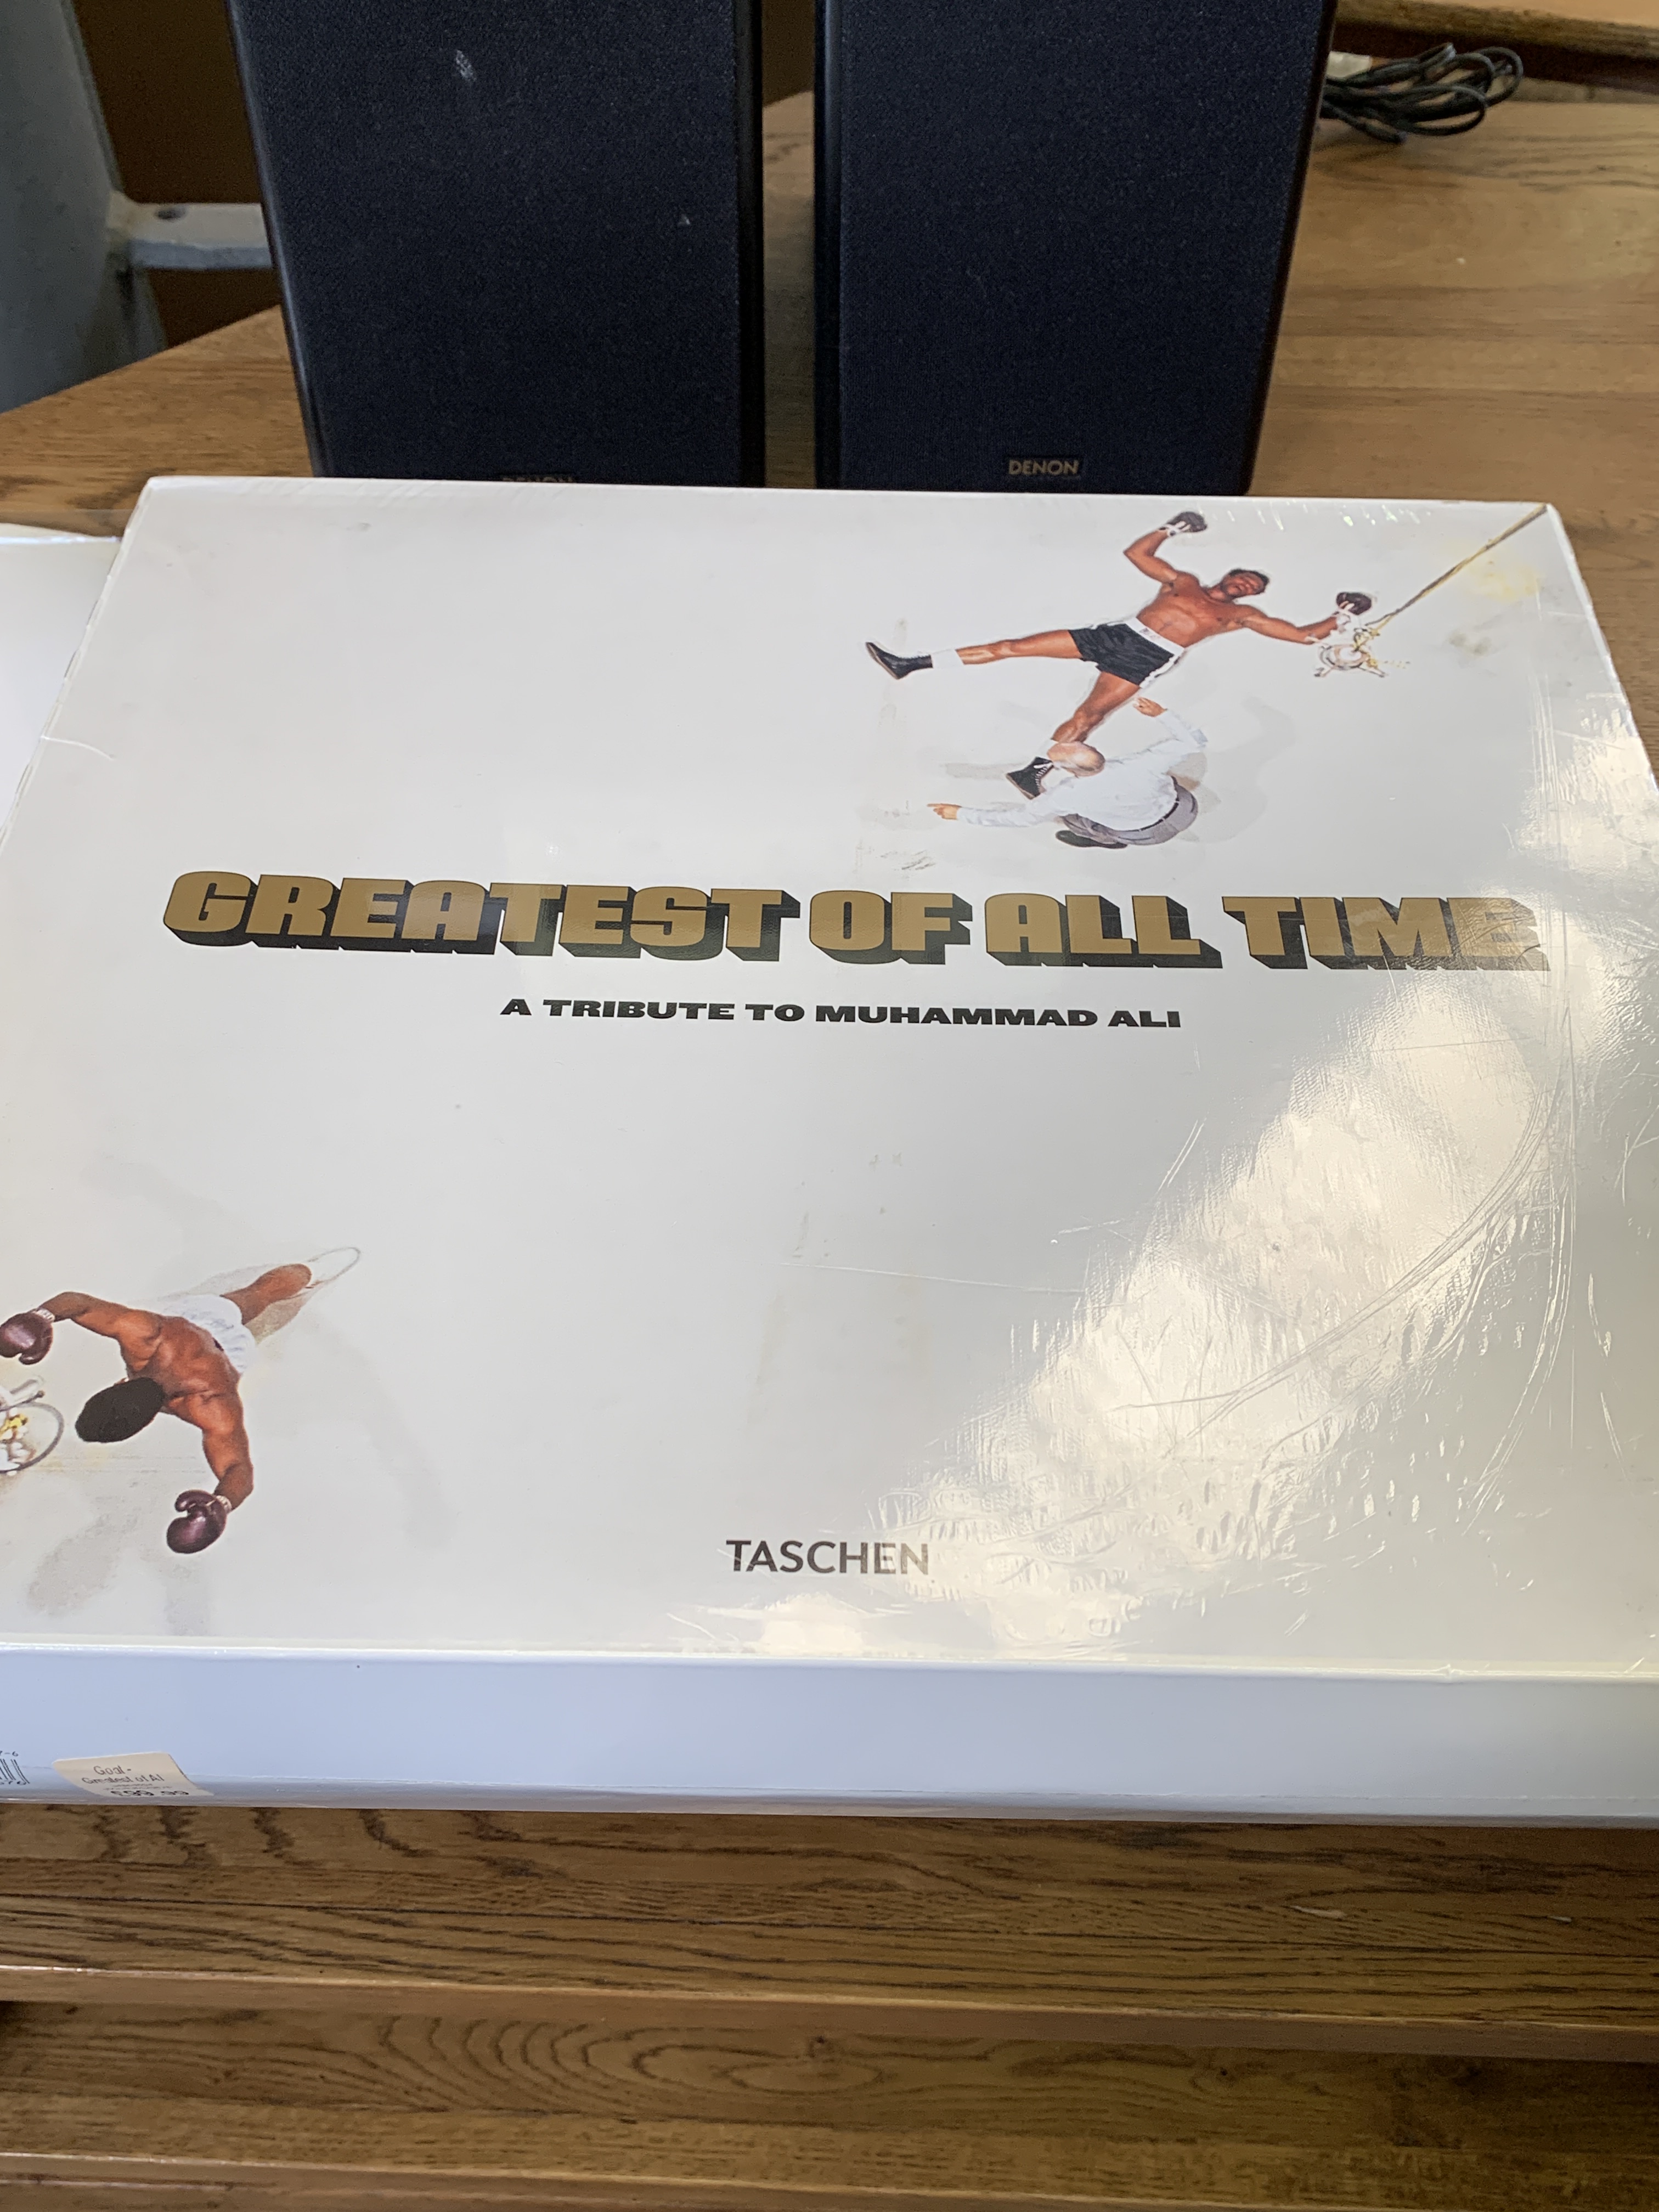 Taschen "Greatest of All Time" tribute to Muhammad Ali, sealed